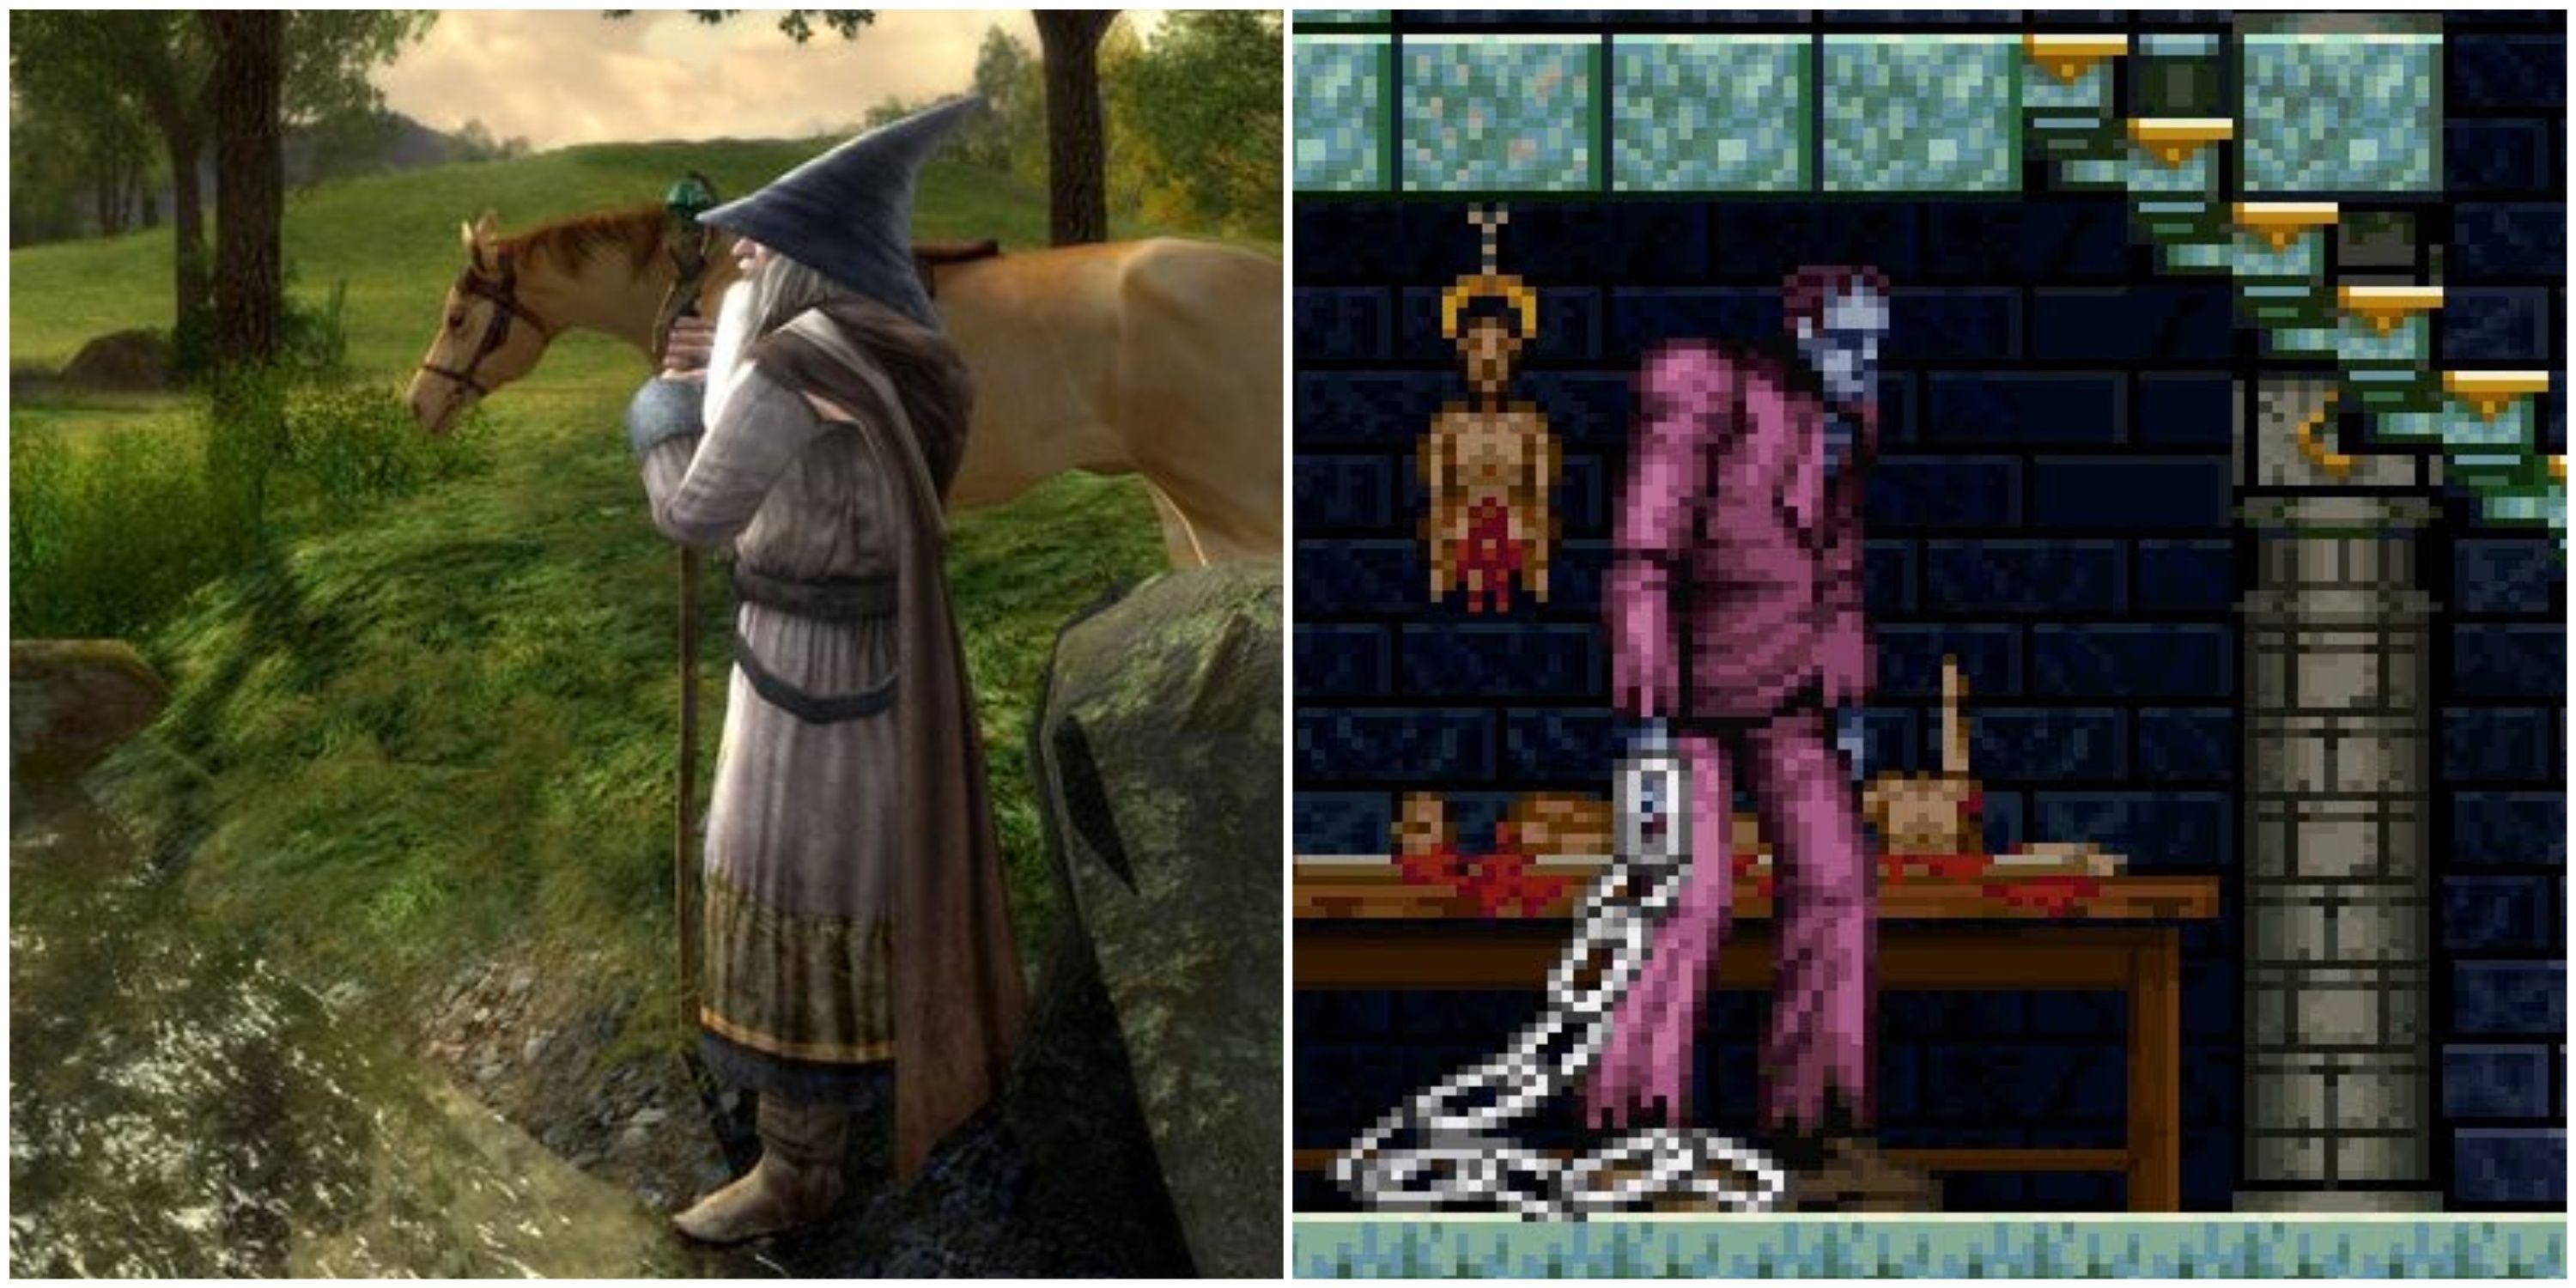 Games Based On Classic Literature